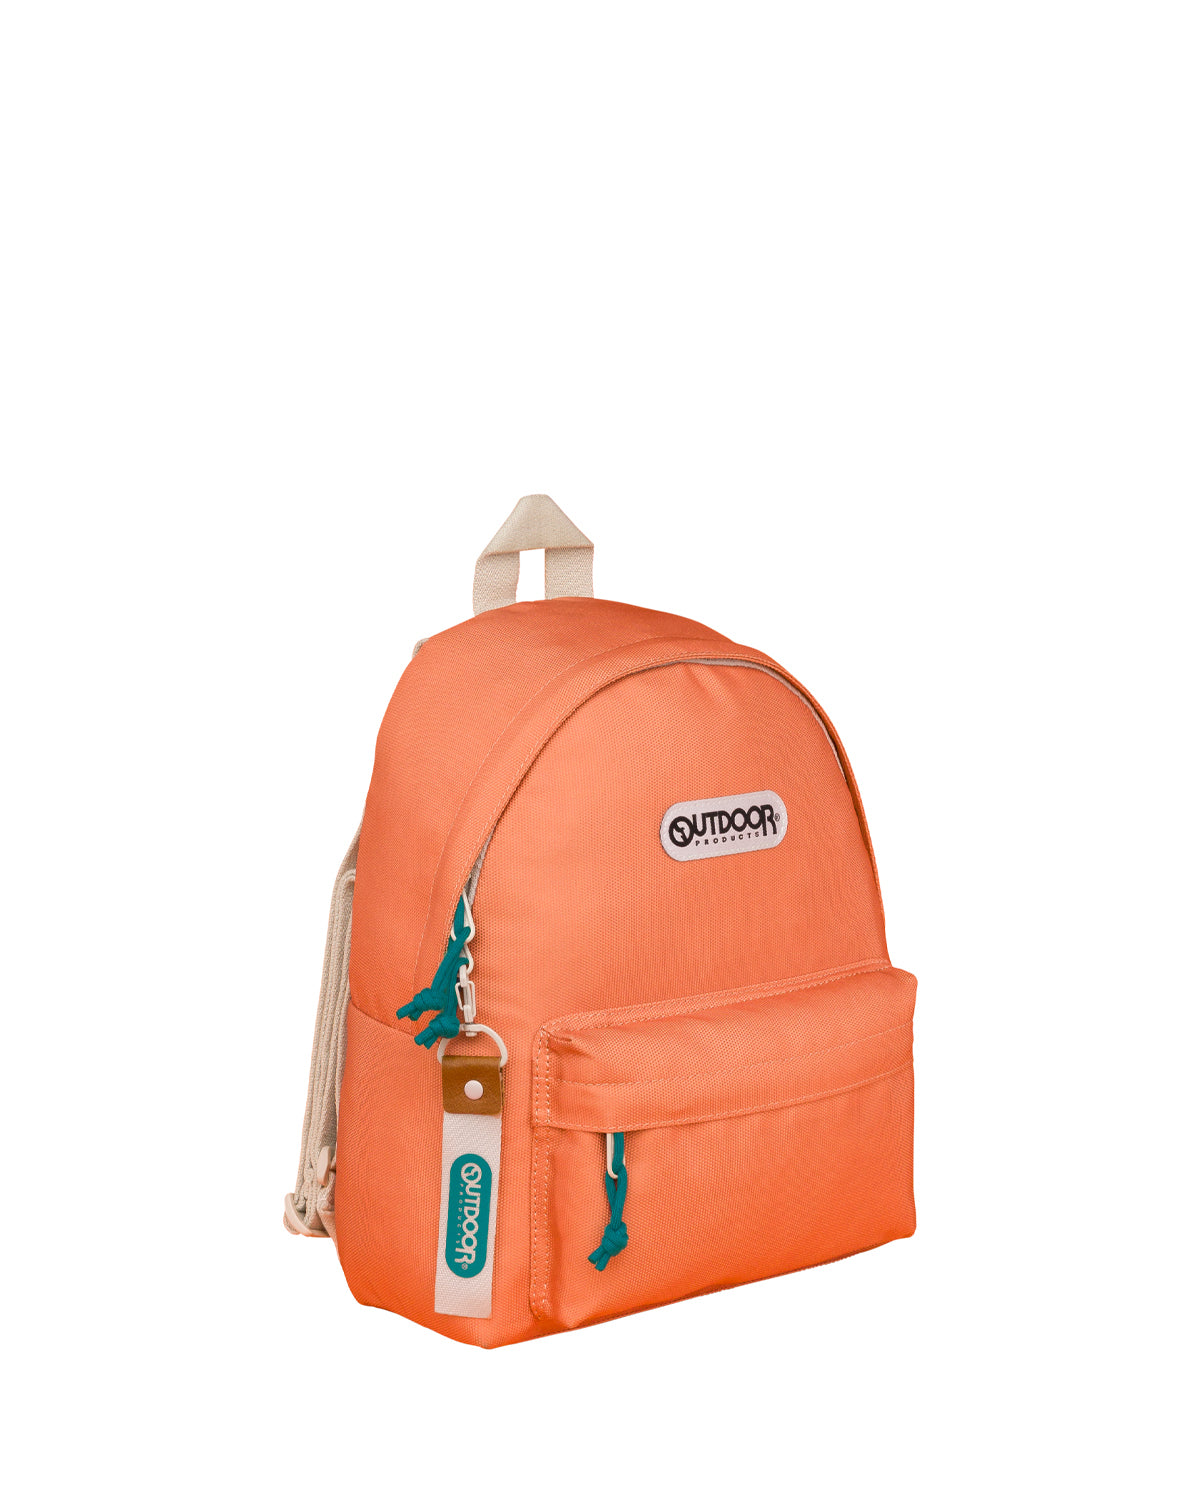 Lacoste Everyday Backpacks